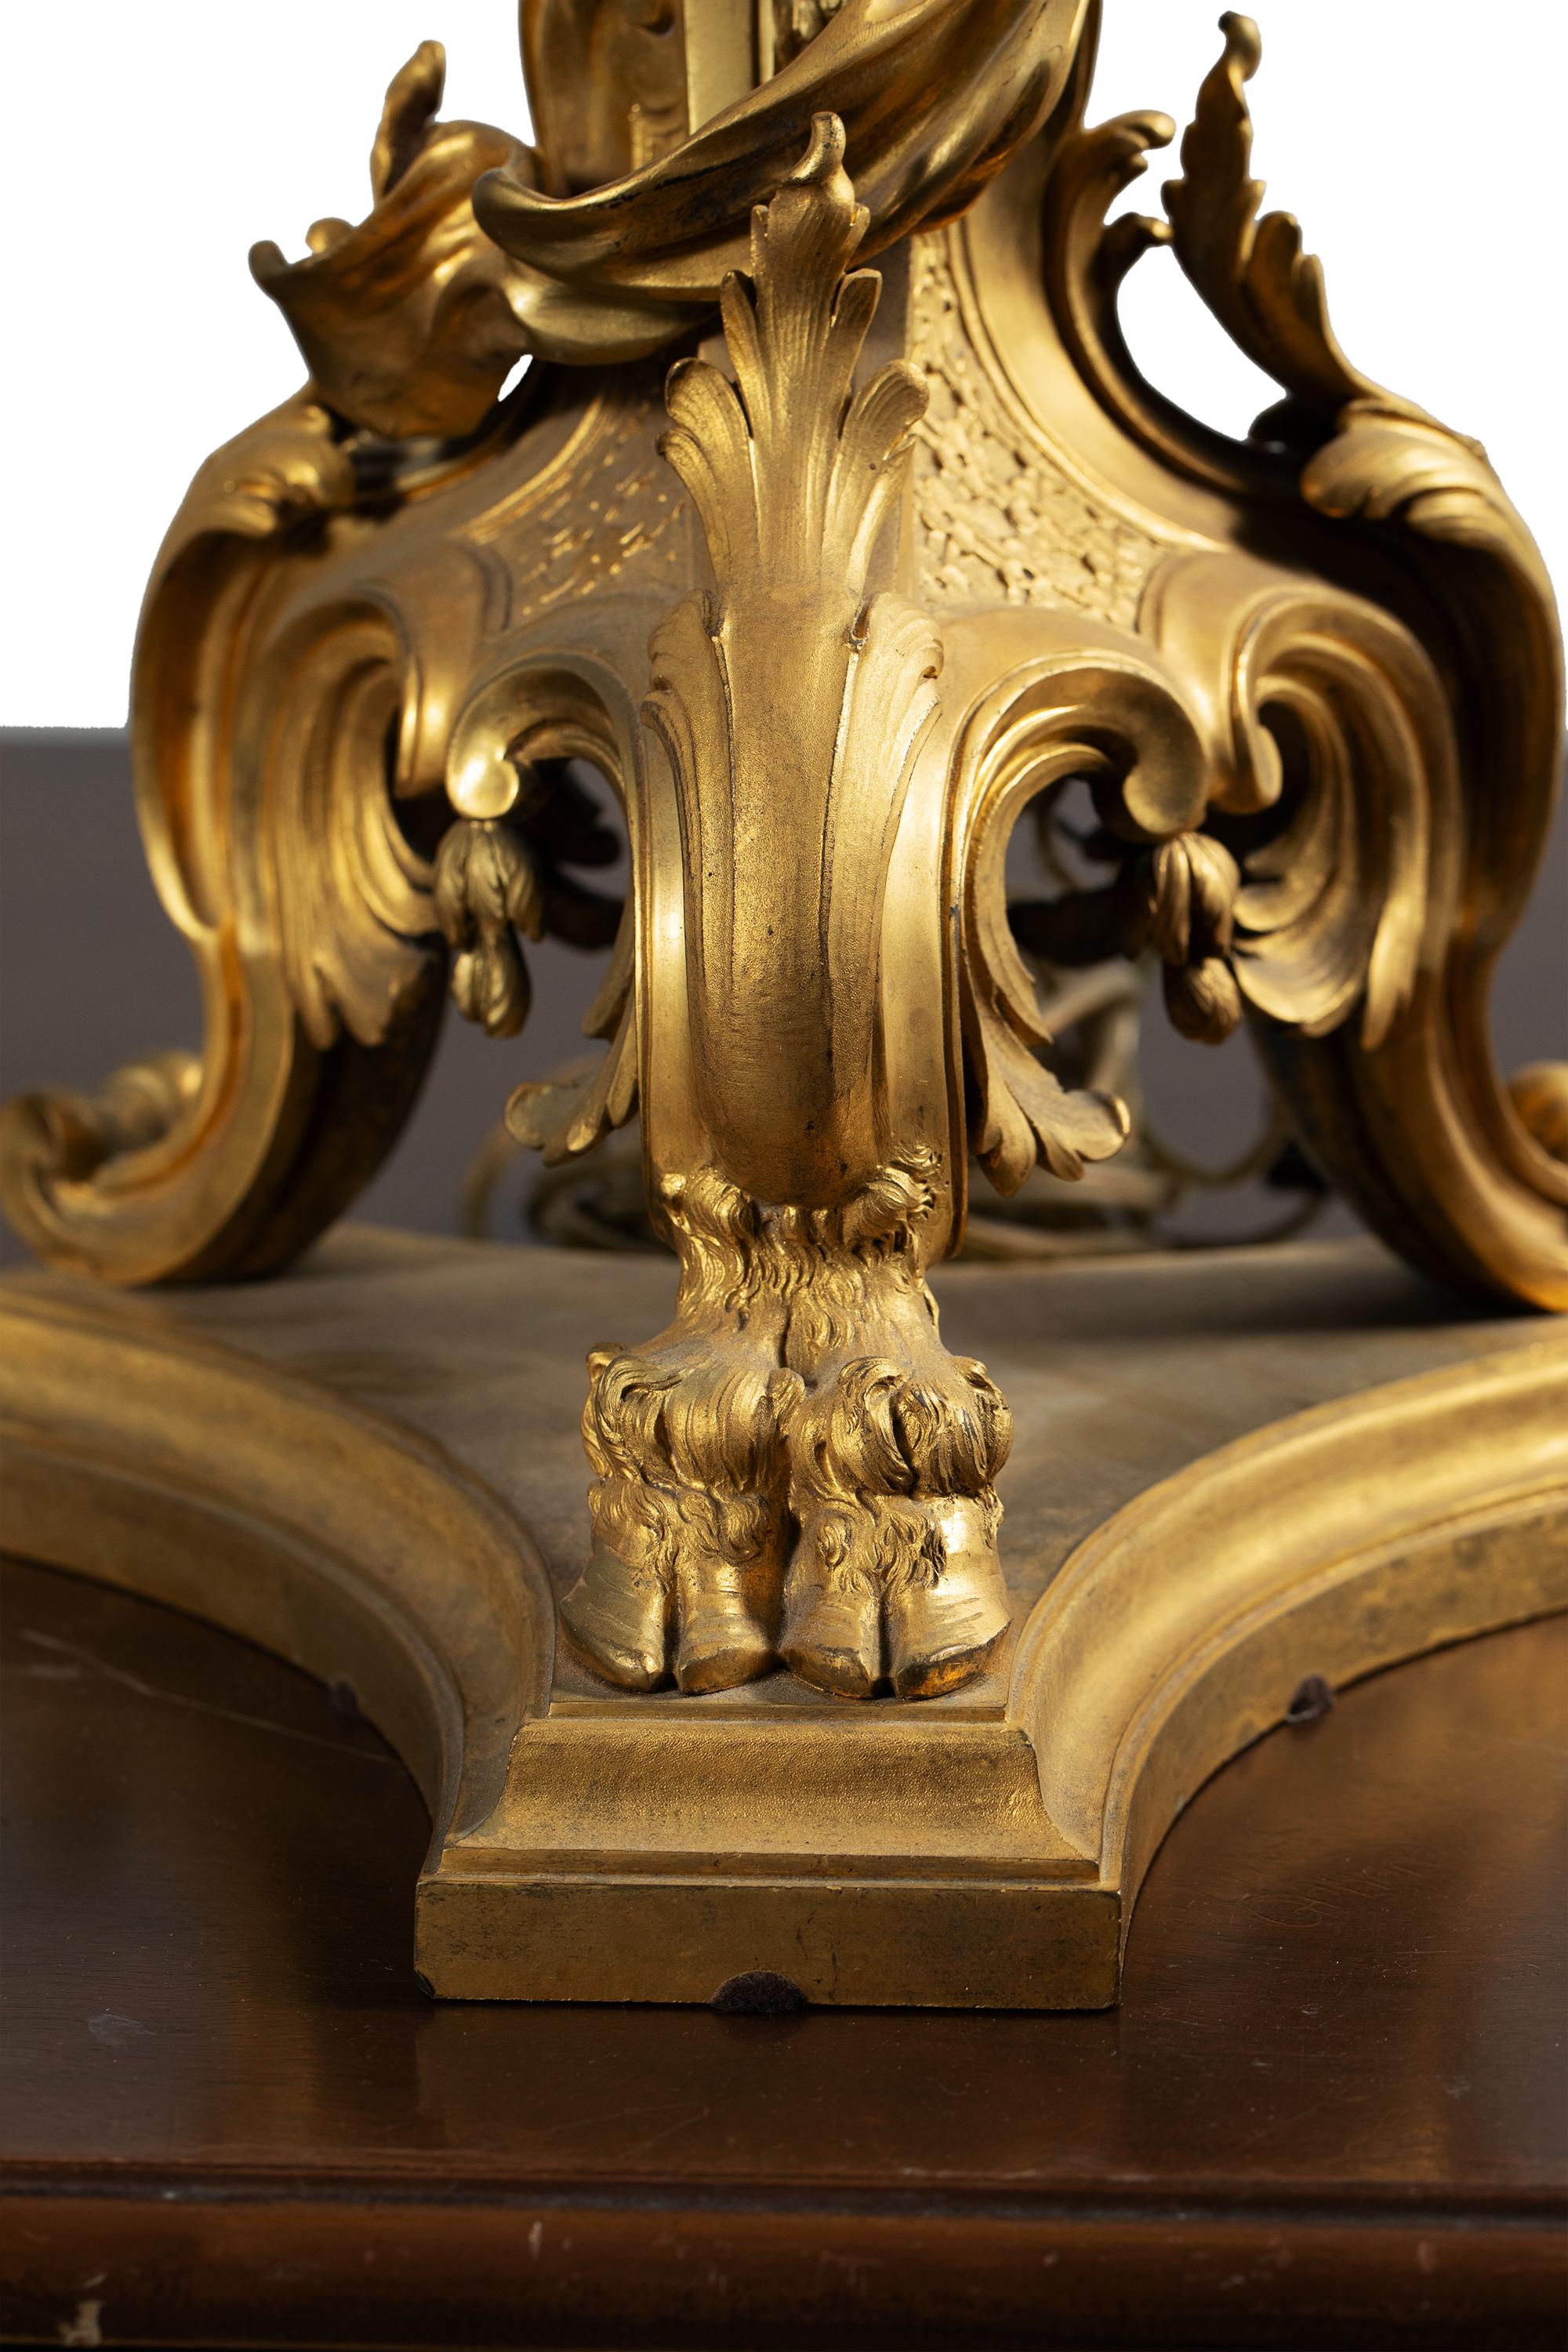 A Large French Gilt-Bronze Centerpiece Candelabra After Clodion, 19th Century For Sale 4